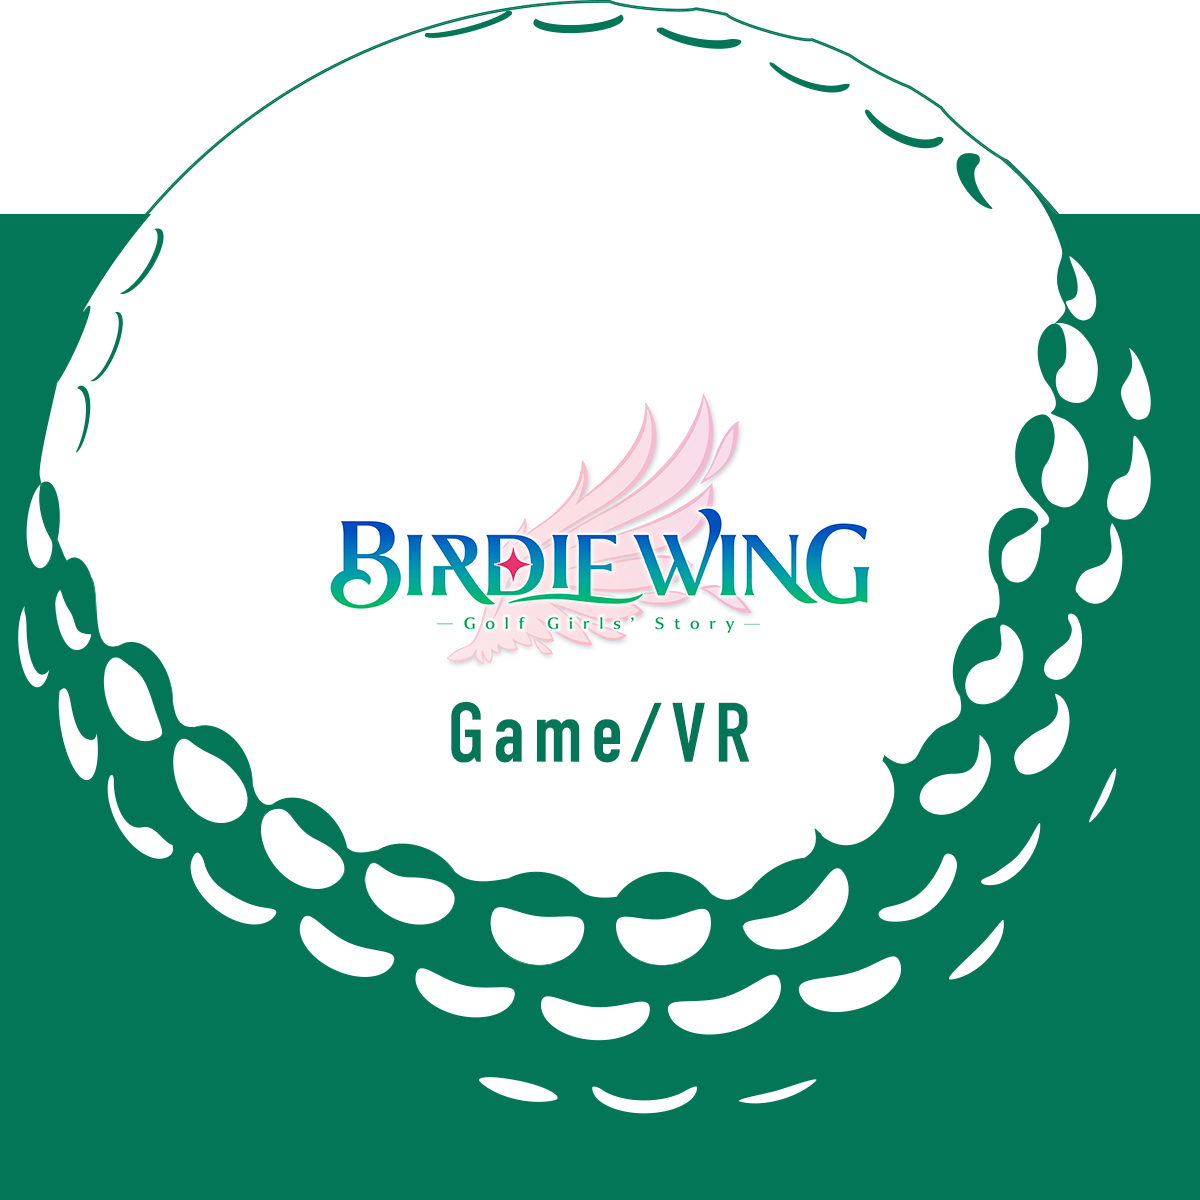 Game/VR